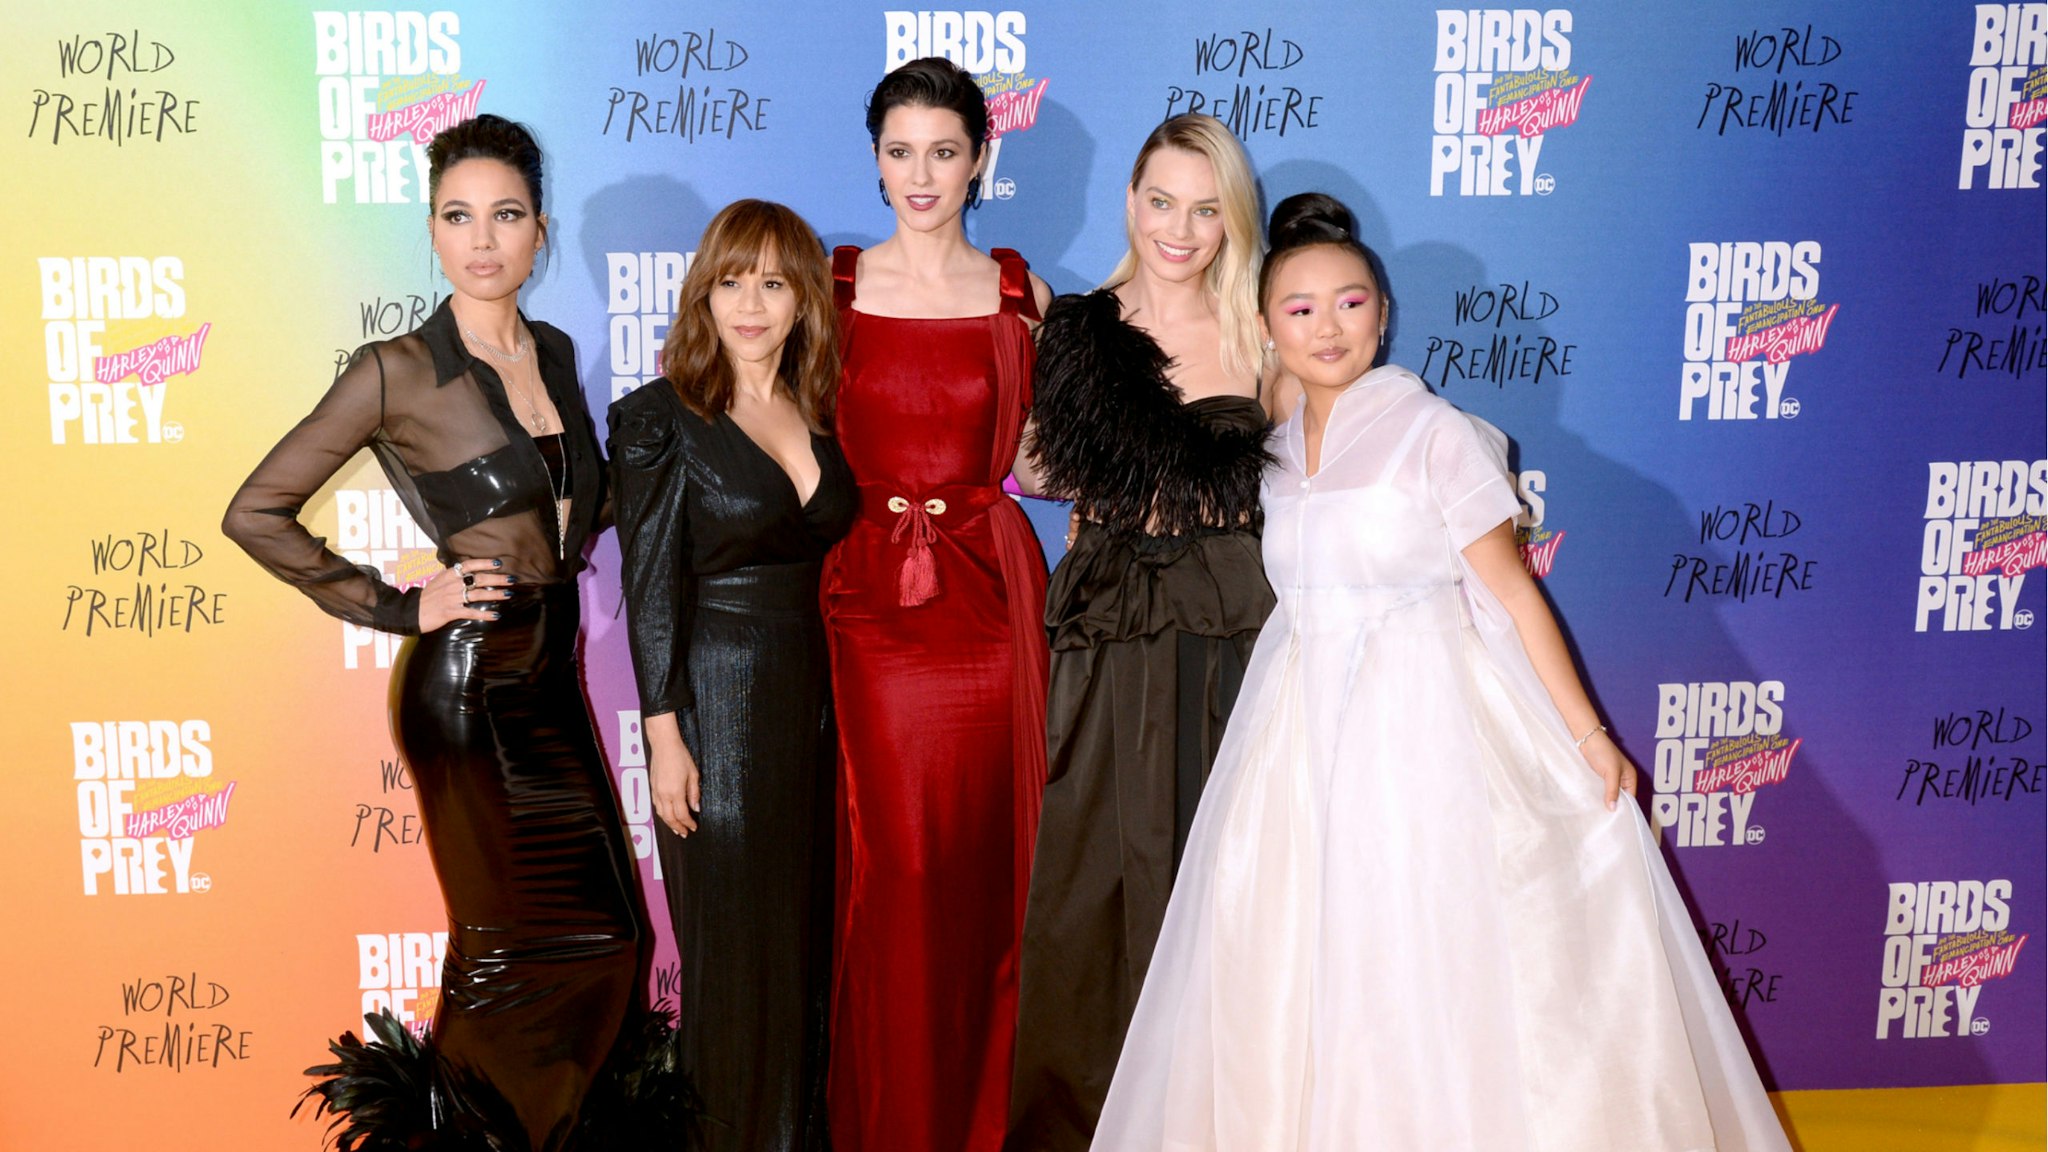 Jurnee Smollett-Bell, Rosie Perez, Mary Elizabeth Winstead, Margot Robbie and Ella Jay Brasco attend the "Birds of Prey: And the Fantabulous Emancipation Of One Harley Quinn" World Premiere at the BFI IMAX on January 29, 2020 in London, England.